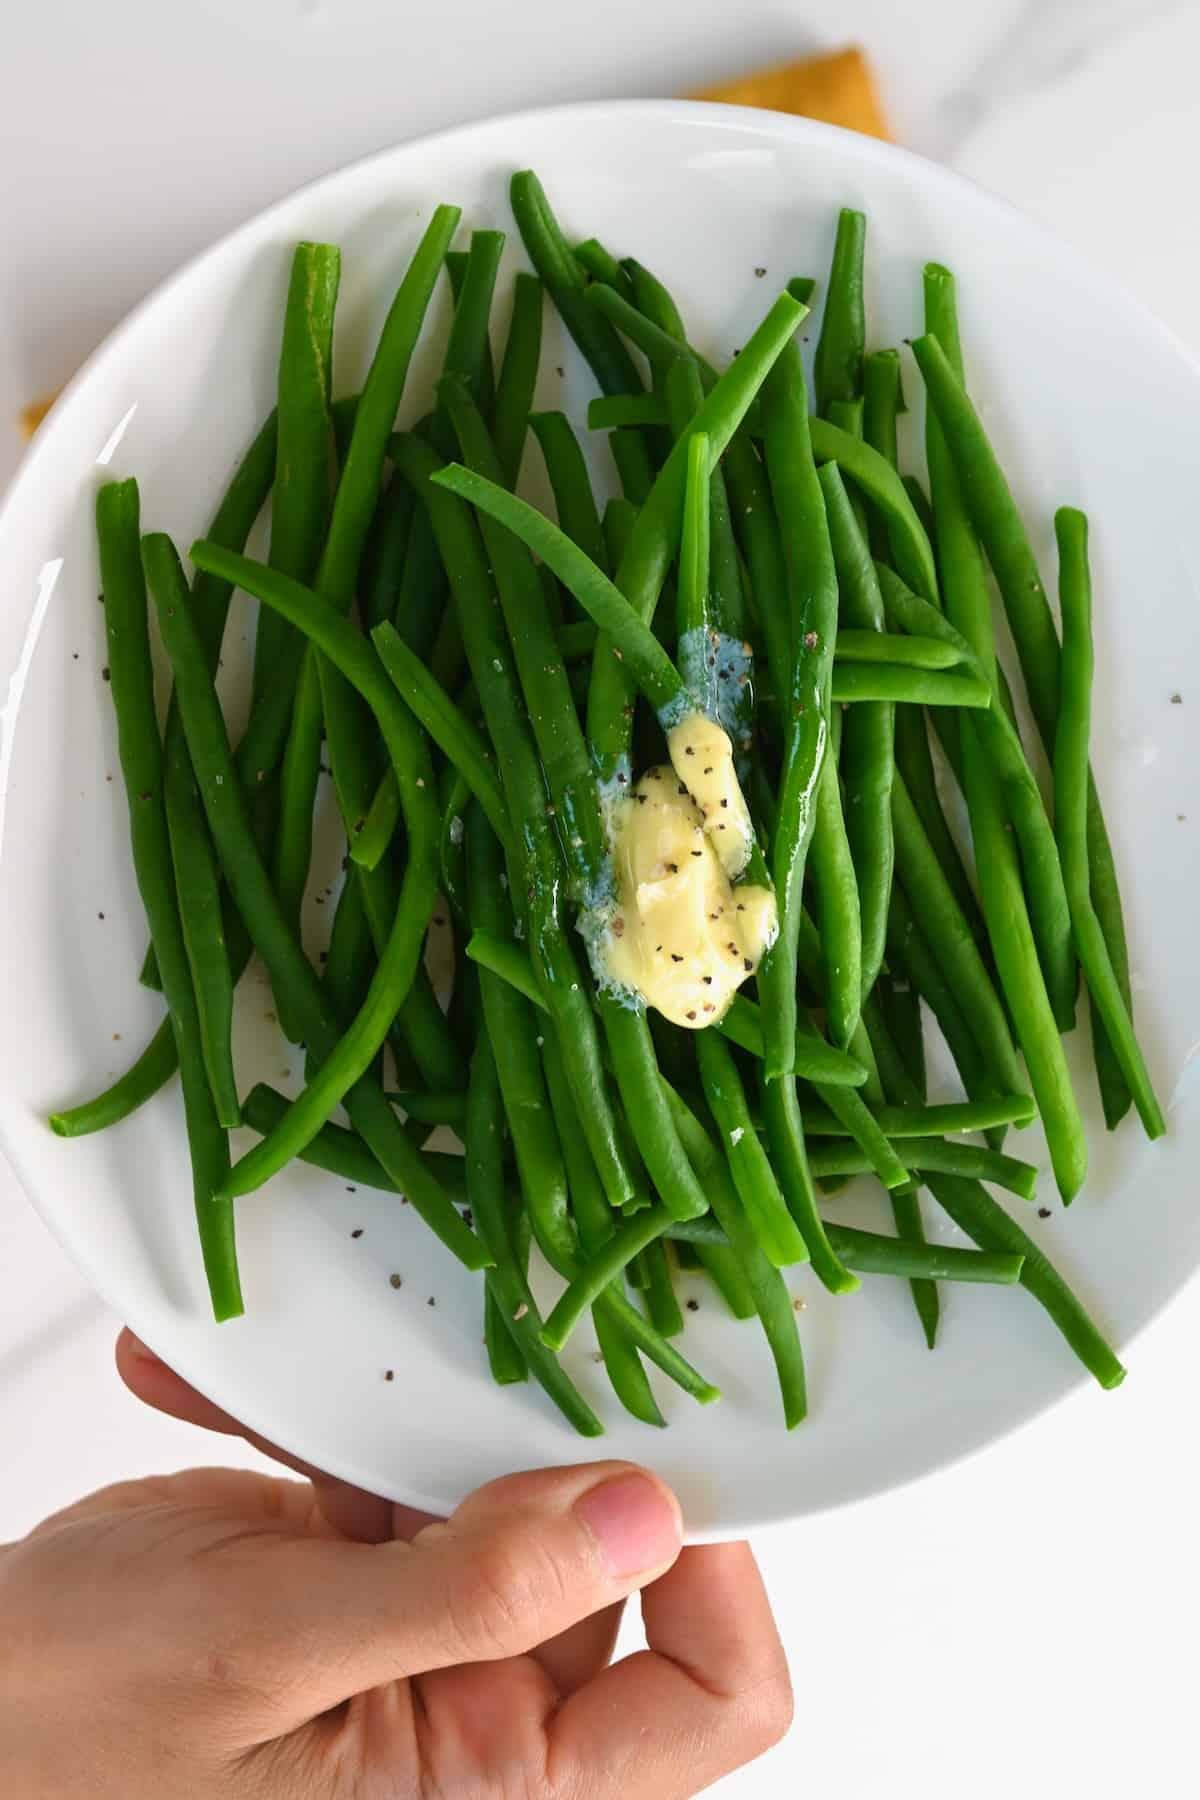 Boiled green beans topped with butter, salt, and pepper